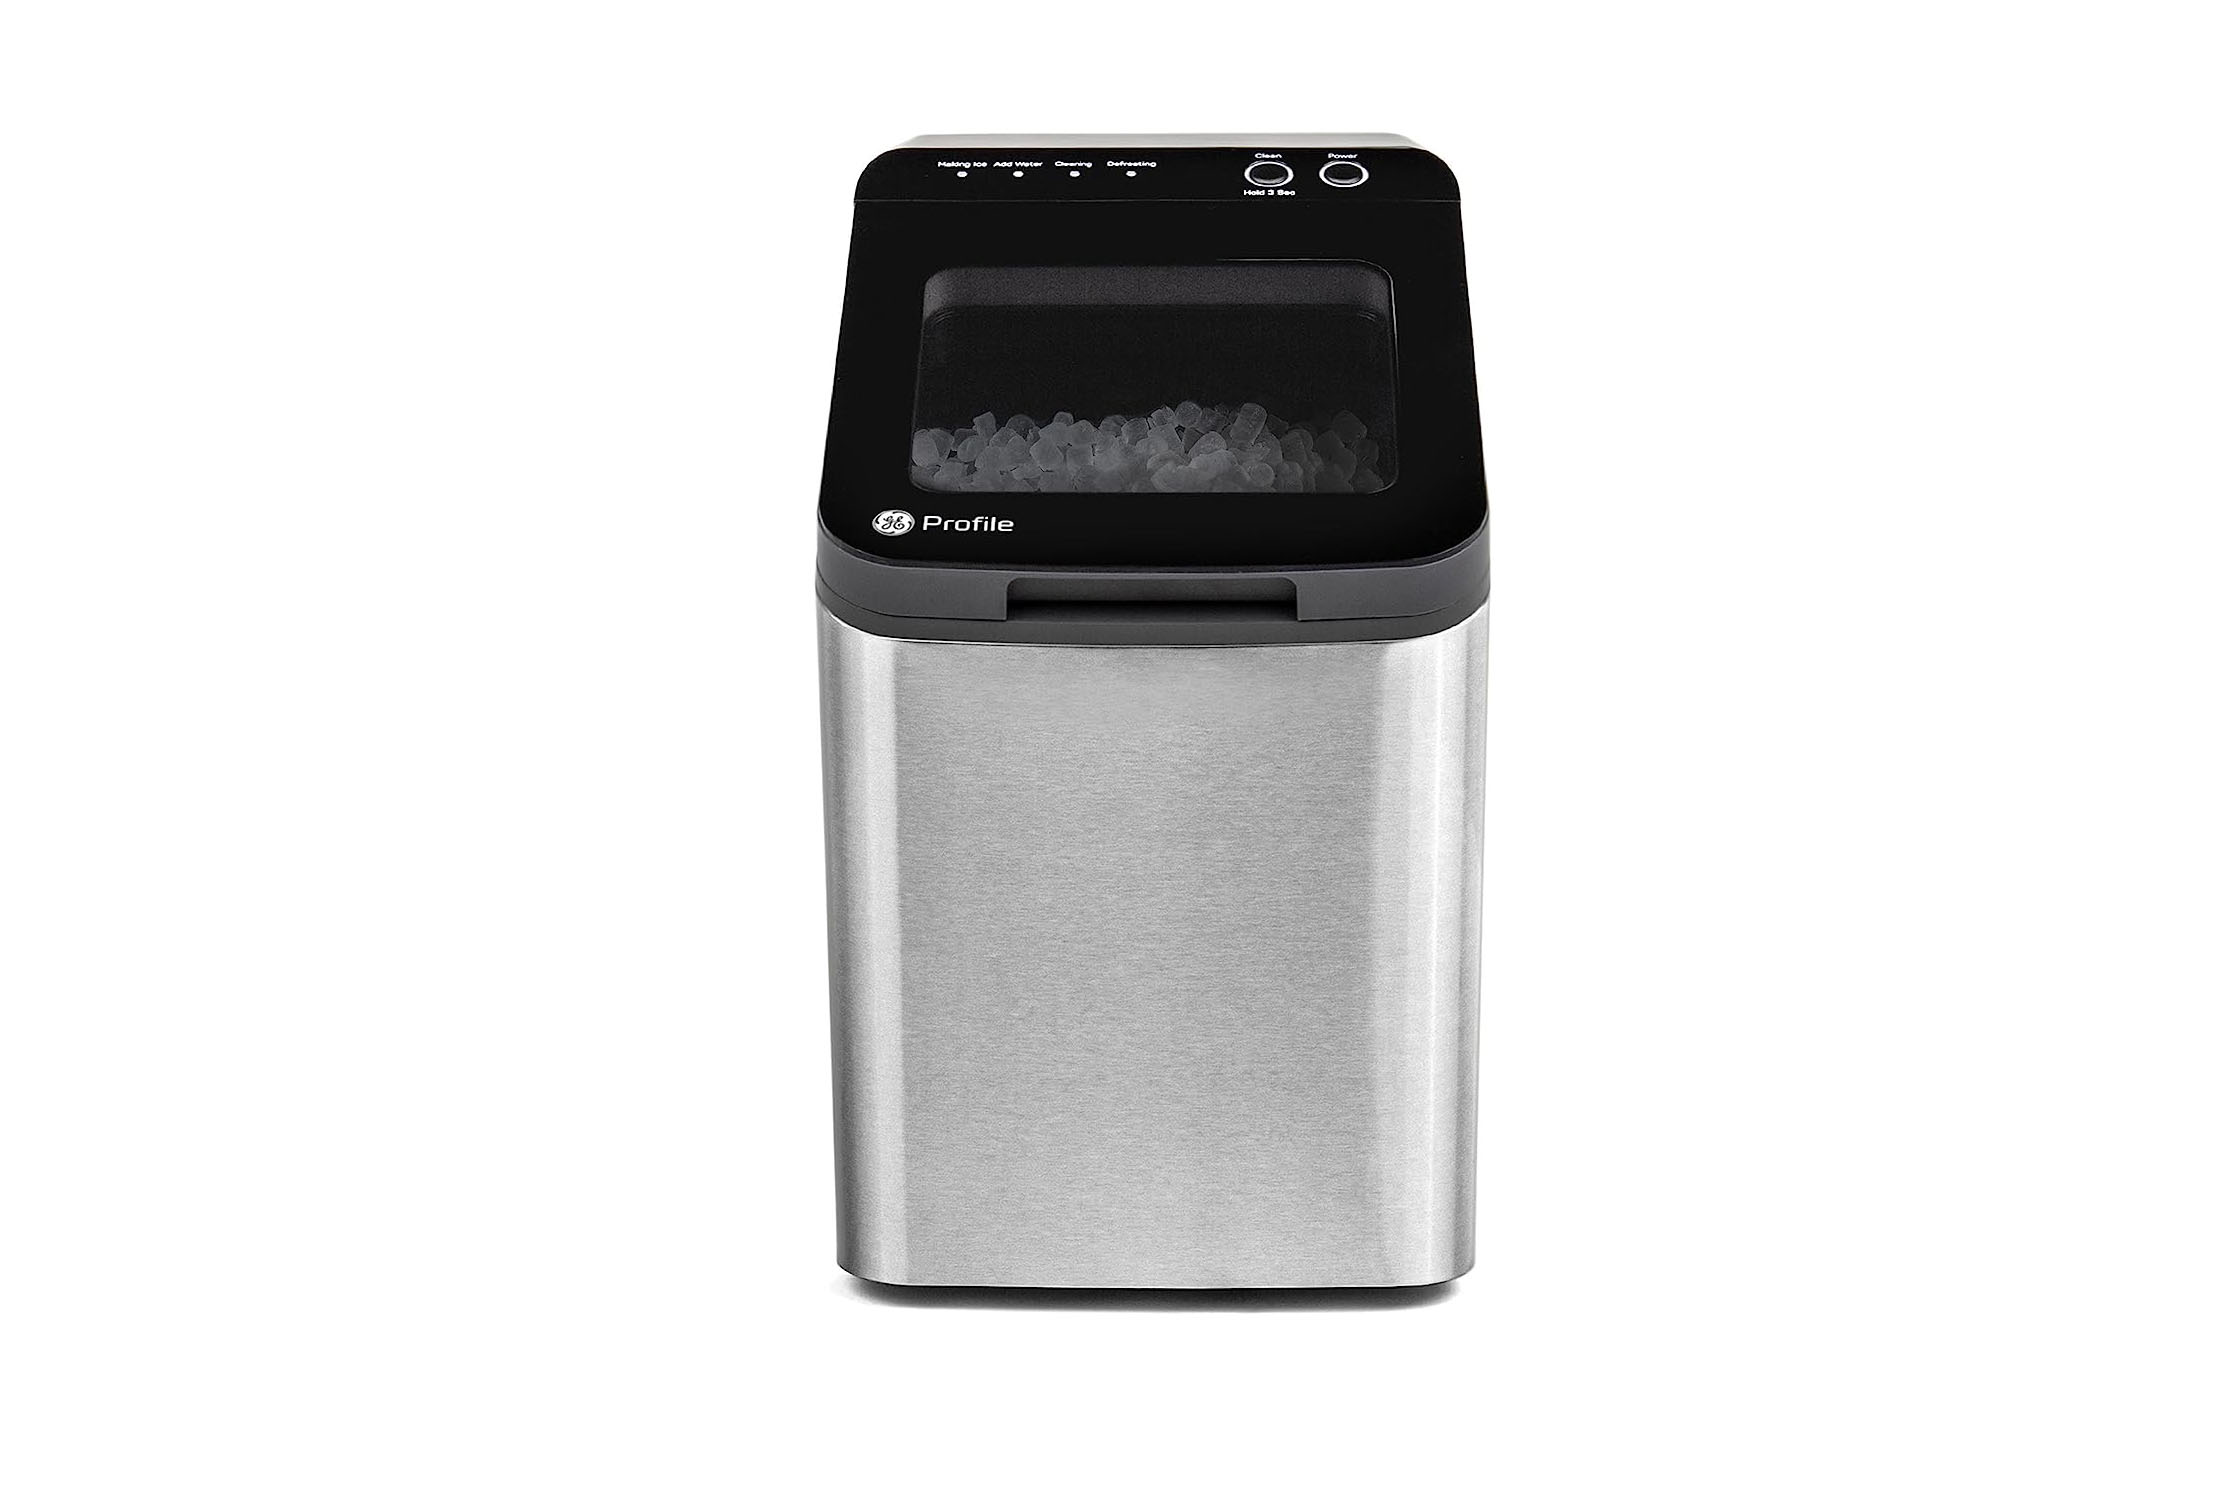 Watch This Before Buying Opal 1.0 Nugget Ice Maker 